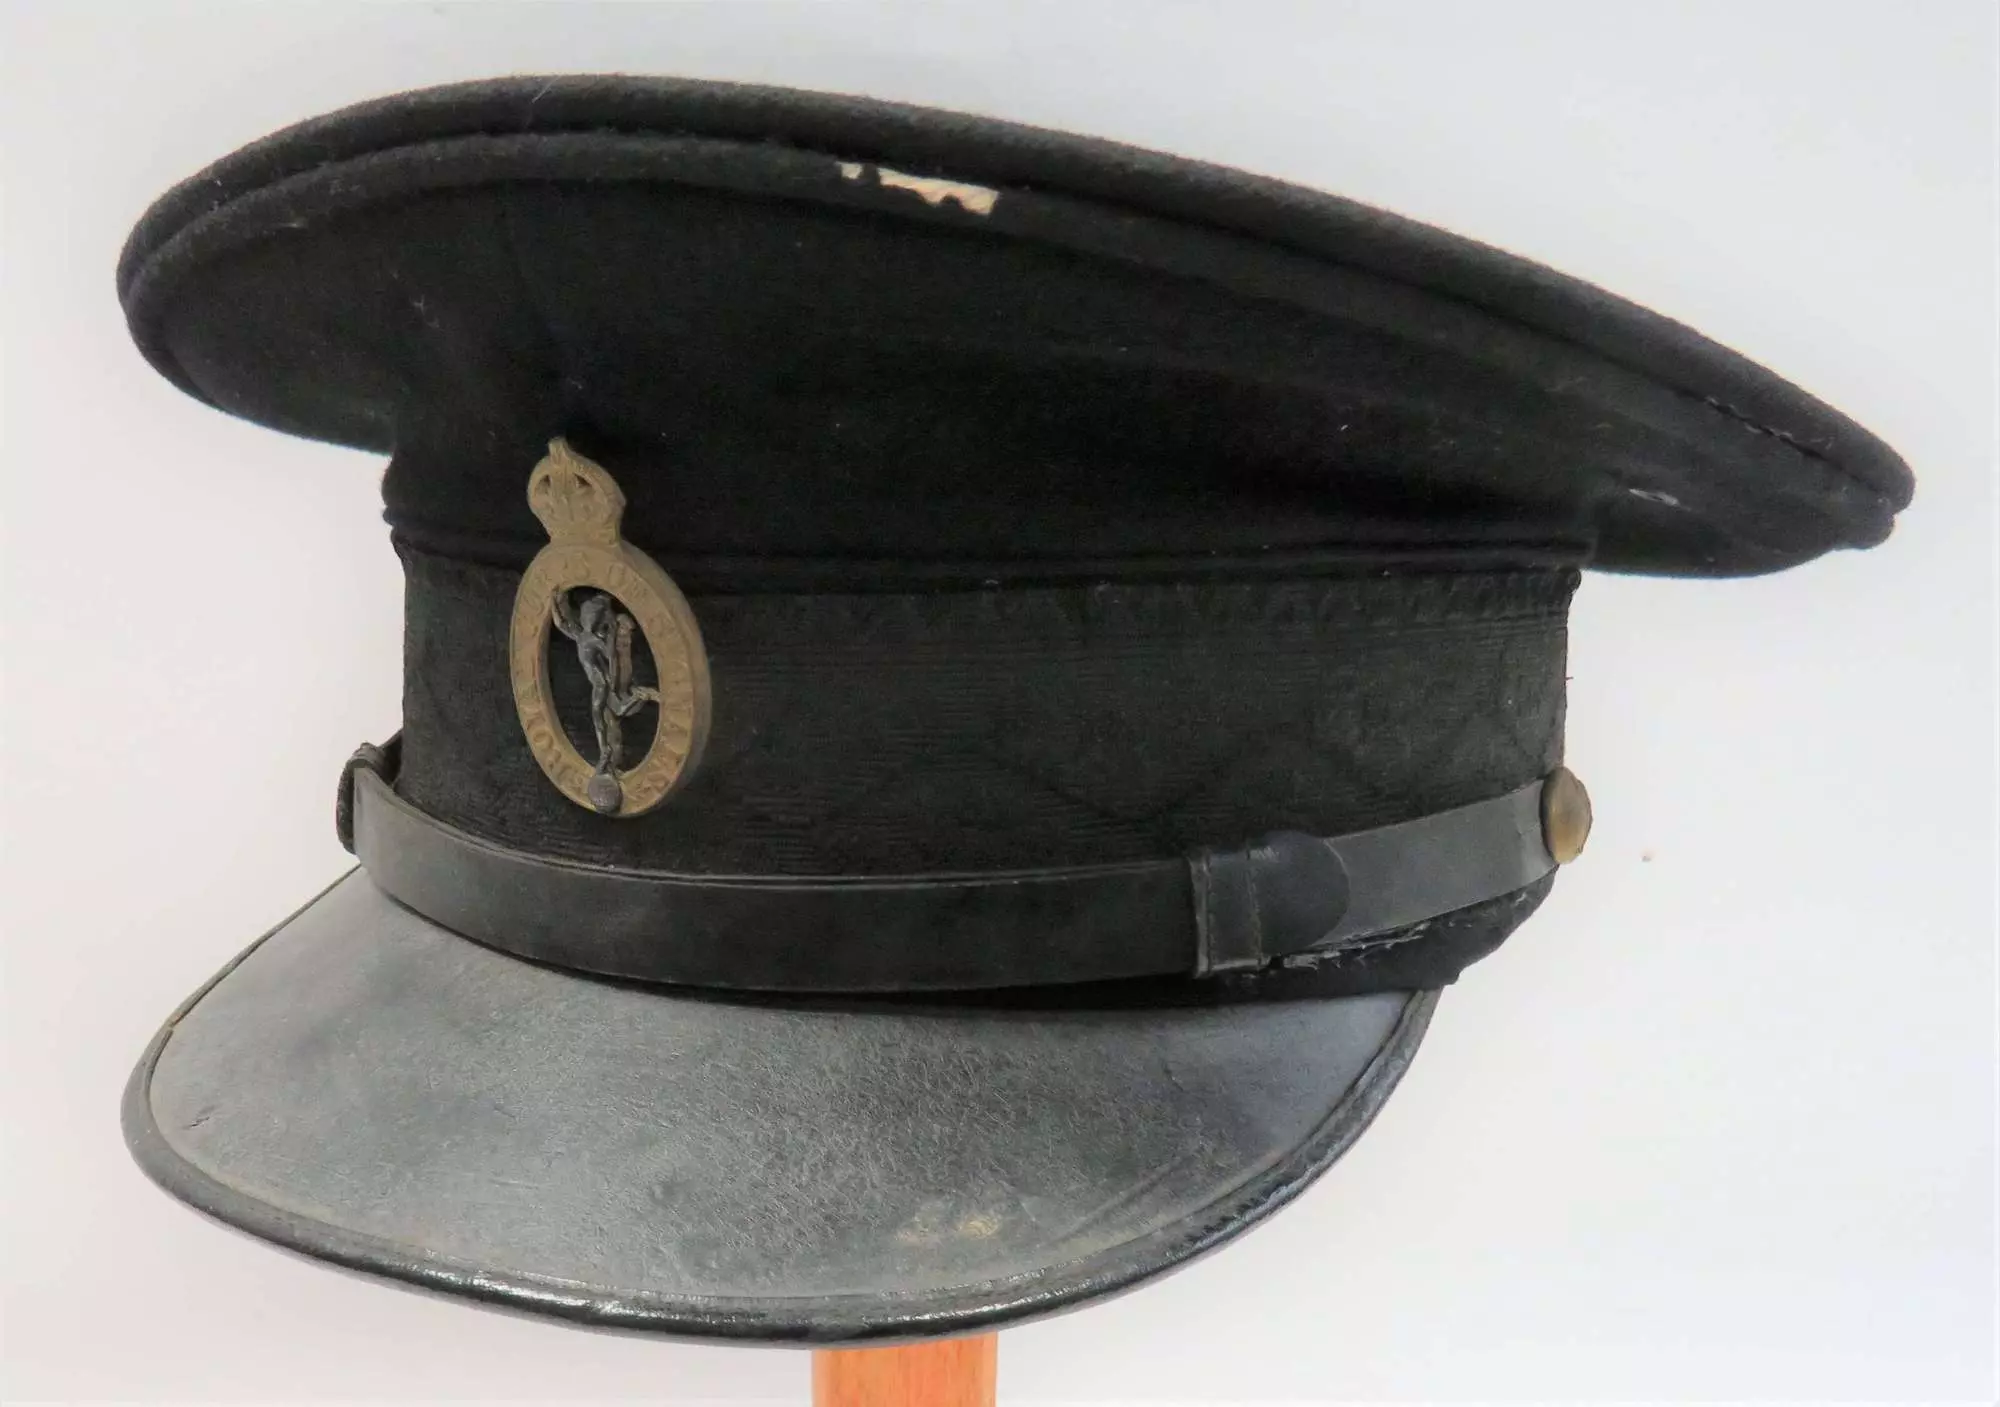 NEW All sizes Genuine British Army Royal Corps of Signals Dress Hat 